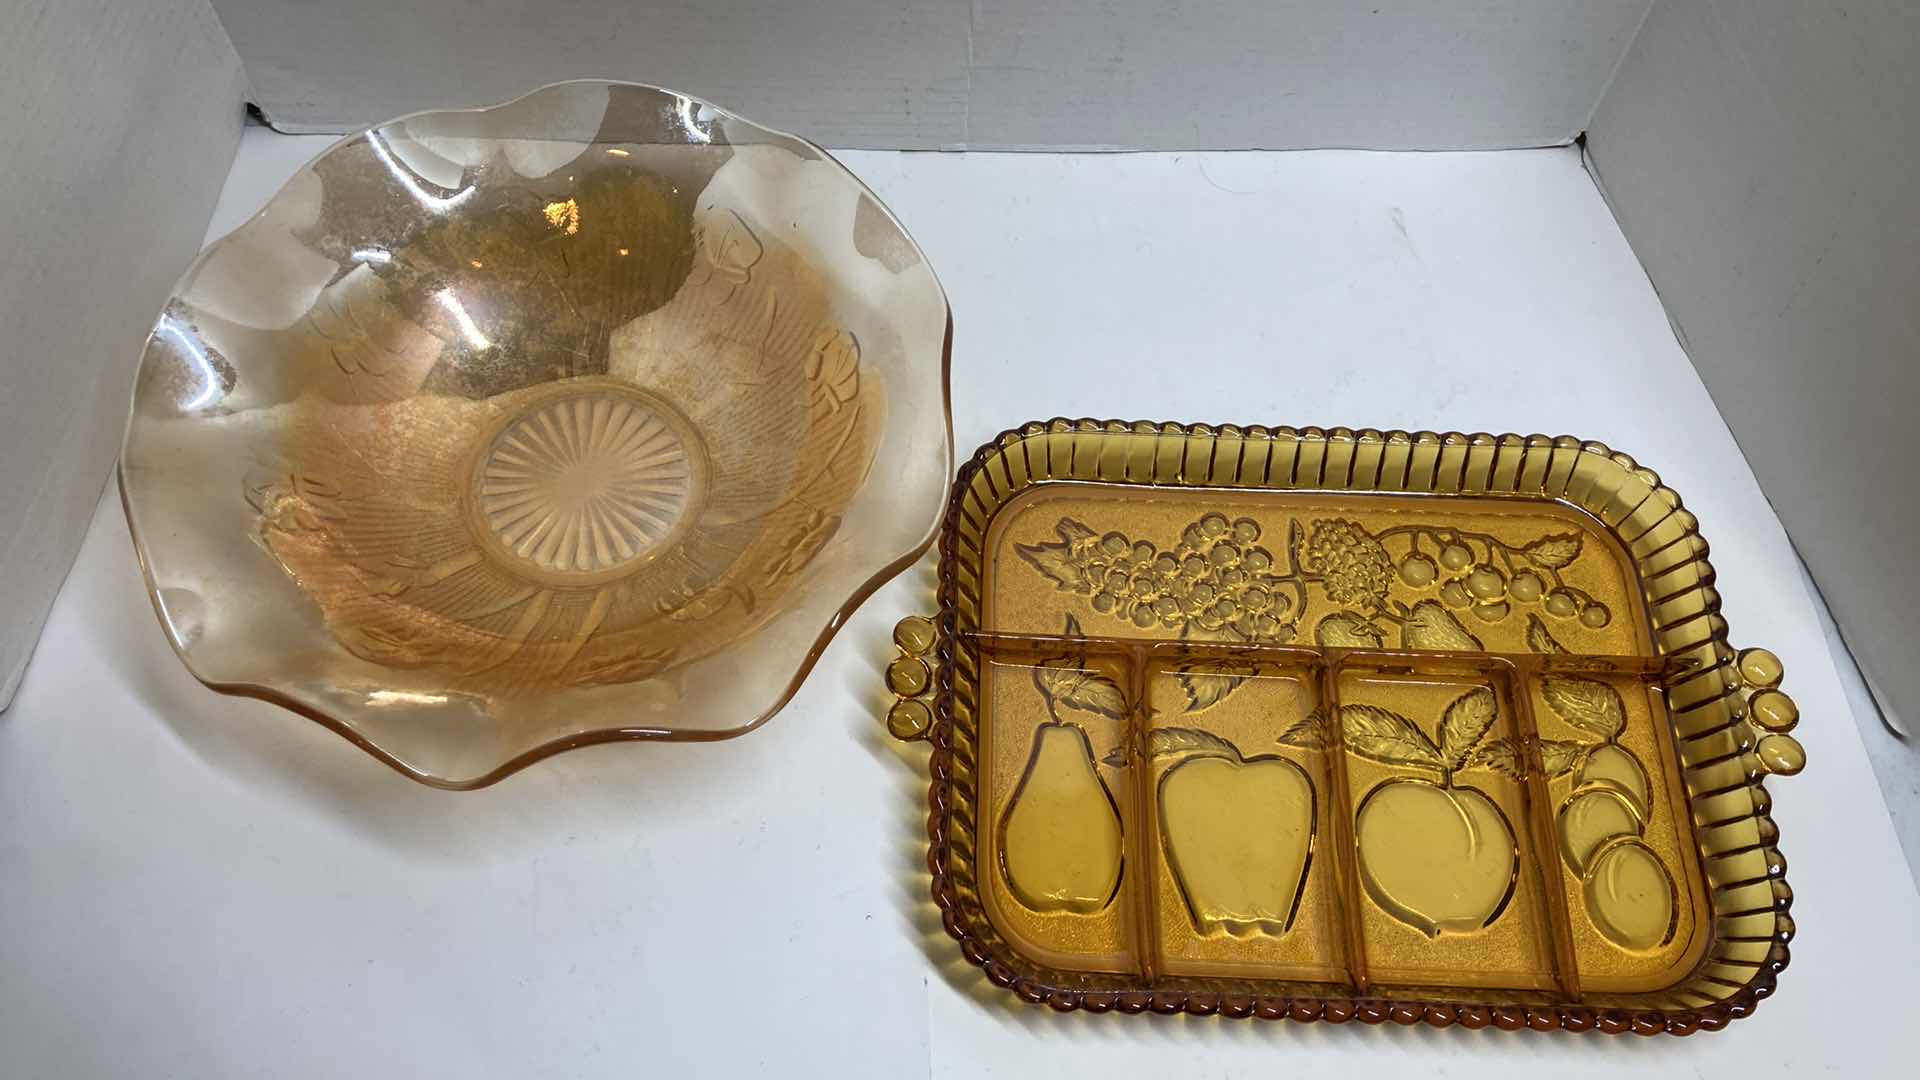 Photo 3 of VINTAGE 11.5” MARIGOLD RUFFLED EDGE CARNIVAL GLASS BOWL & INDIANA AMBER GLASS CONDIMENT TRAY 12.5” X 8.5”